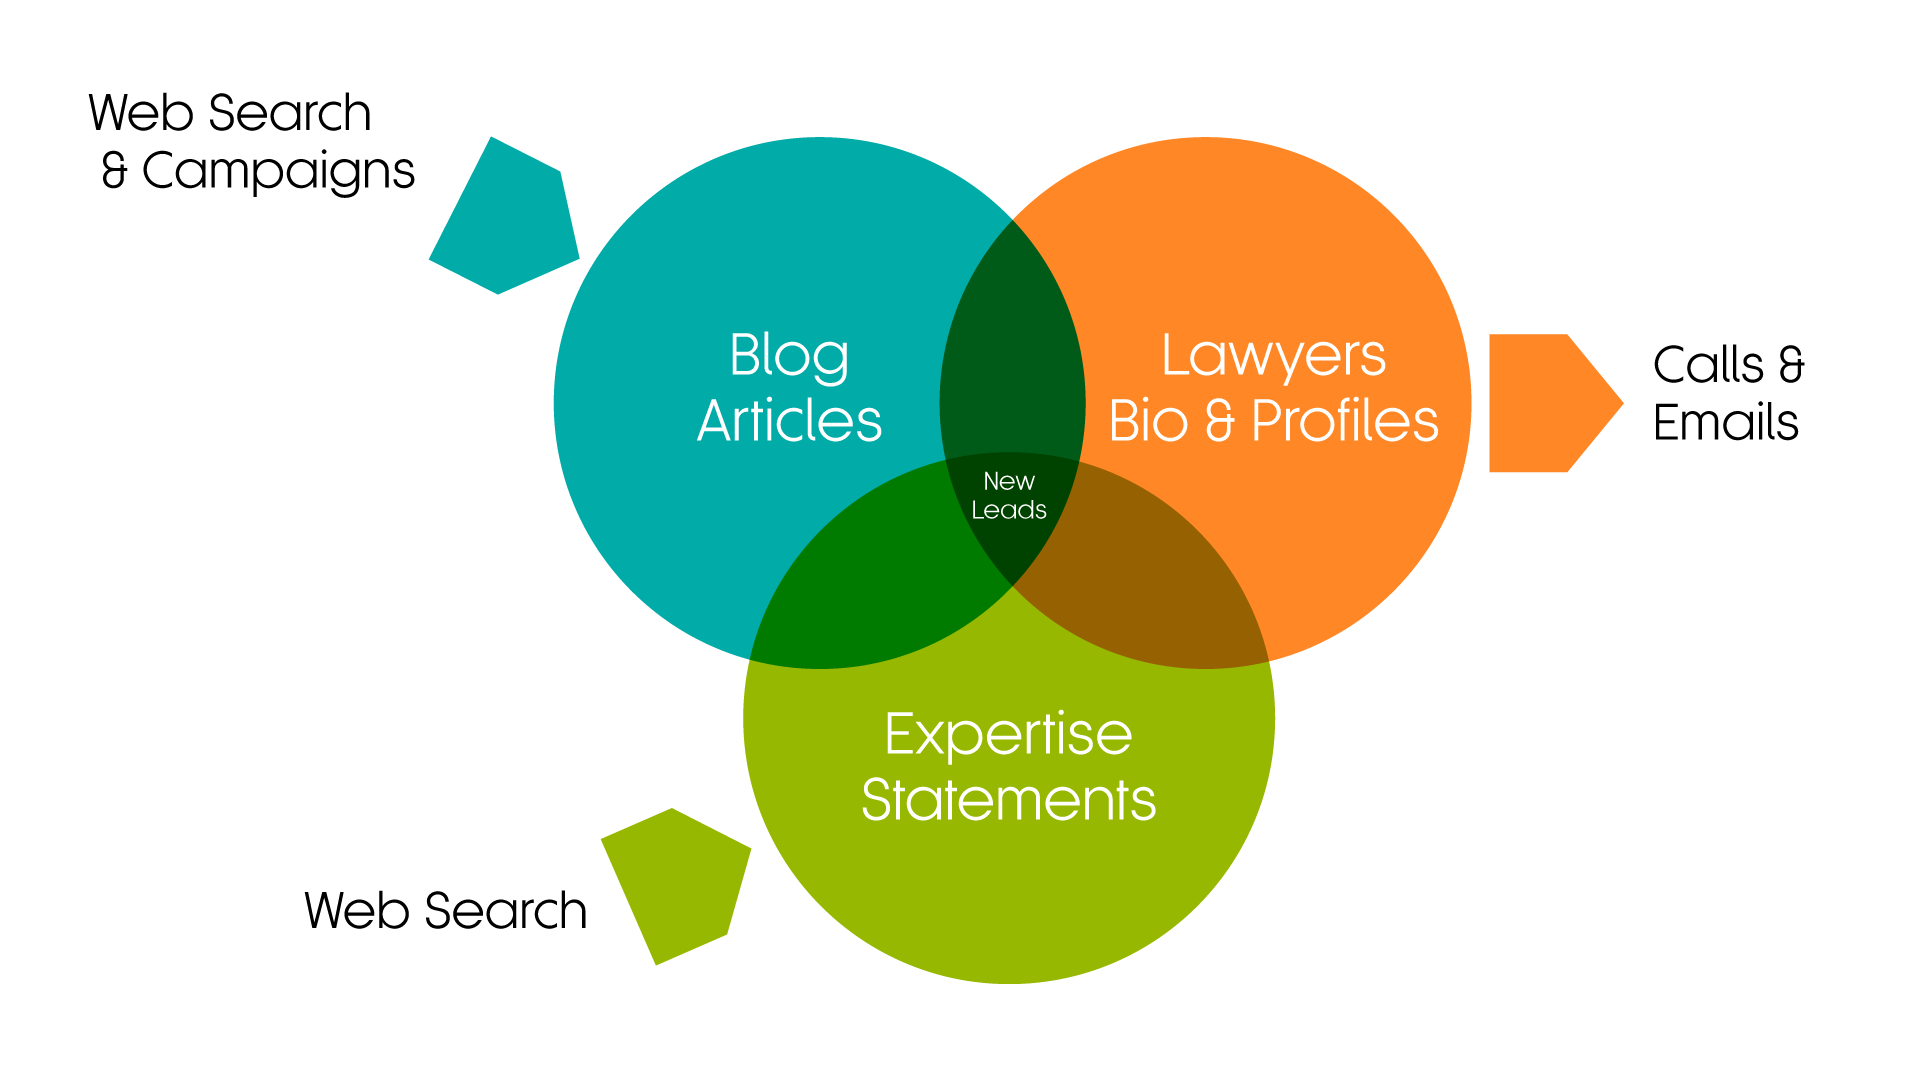 How articles, expertise statements and lawyer profiles can generate leads.